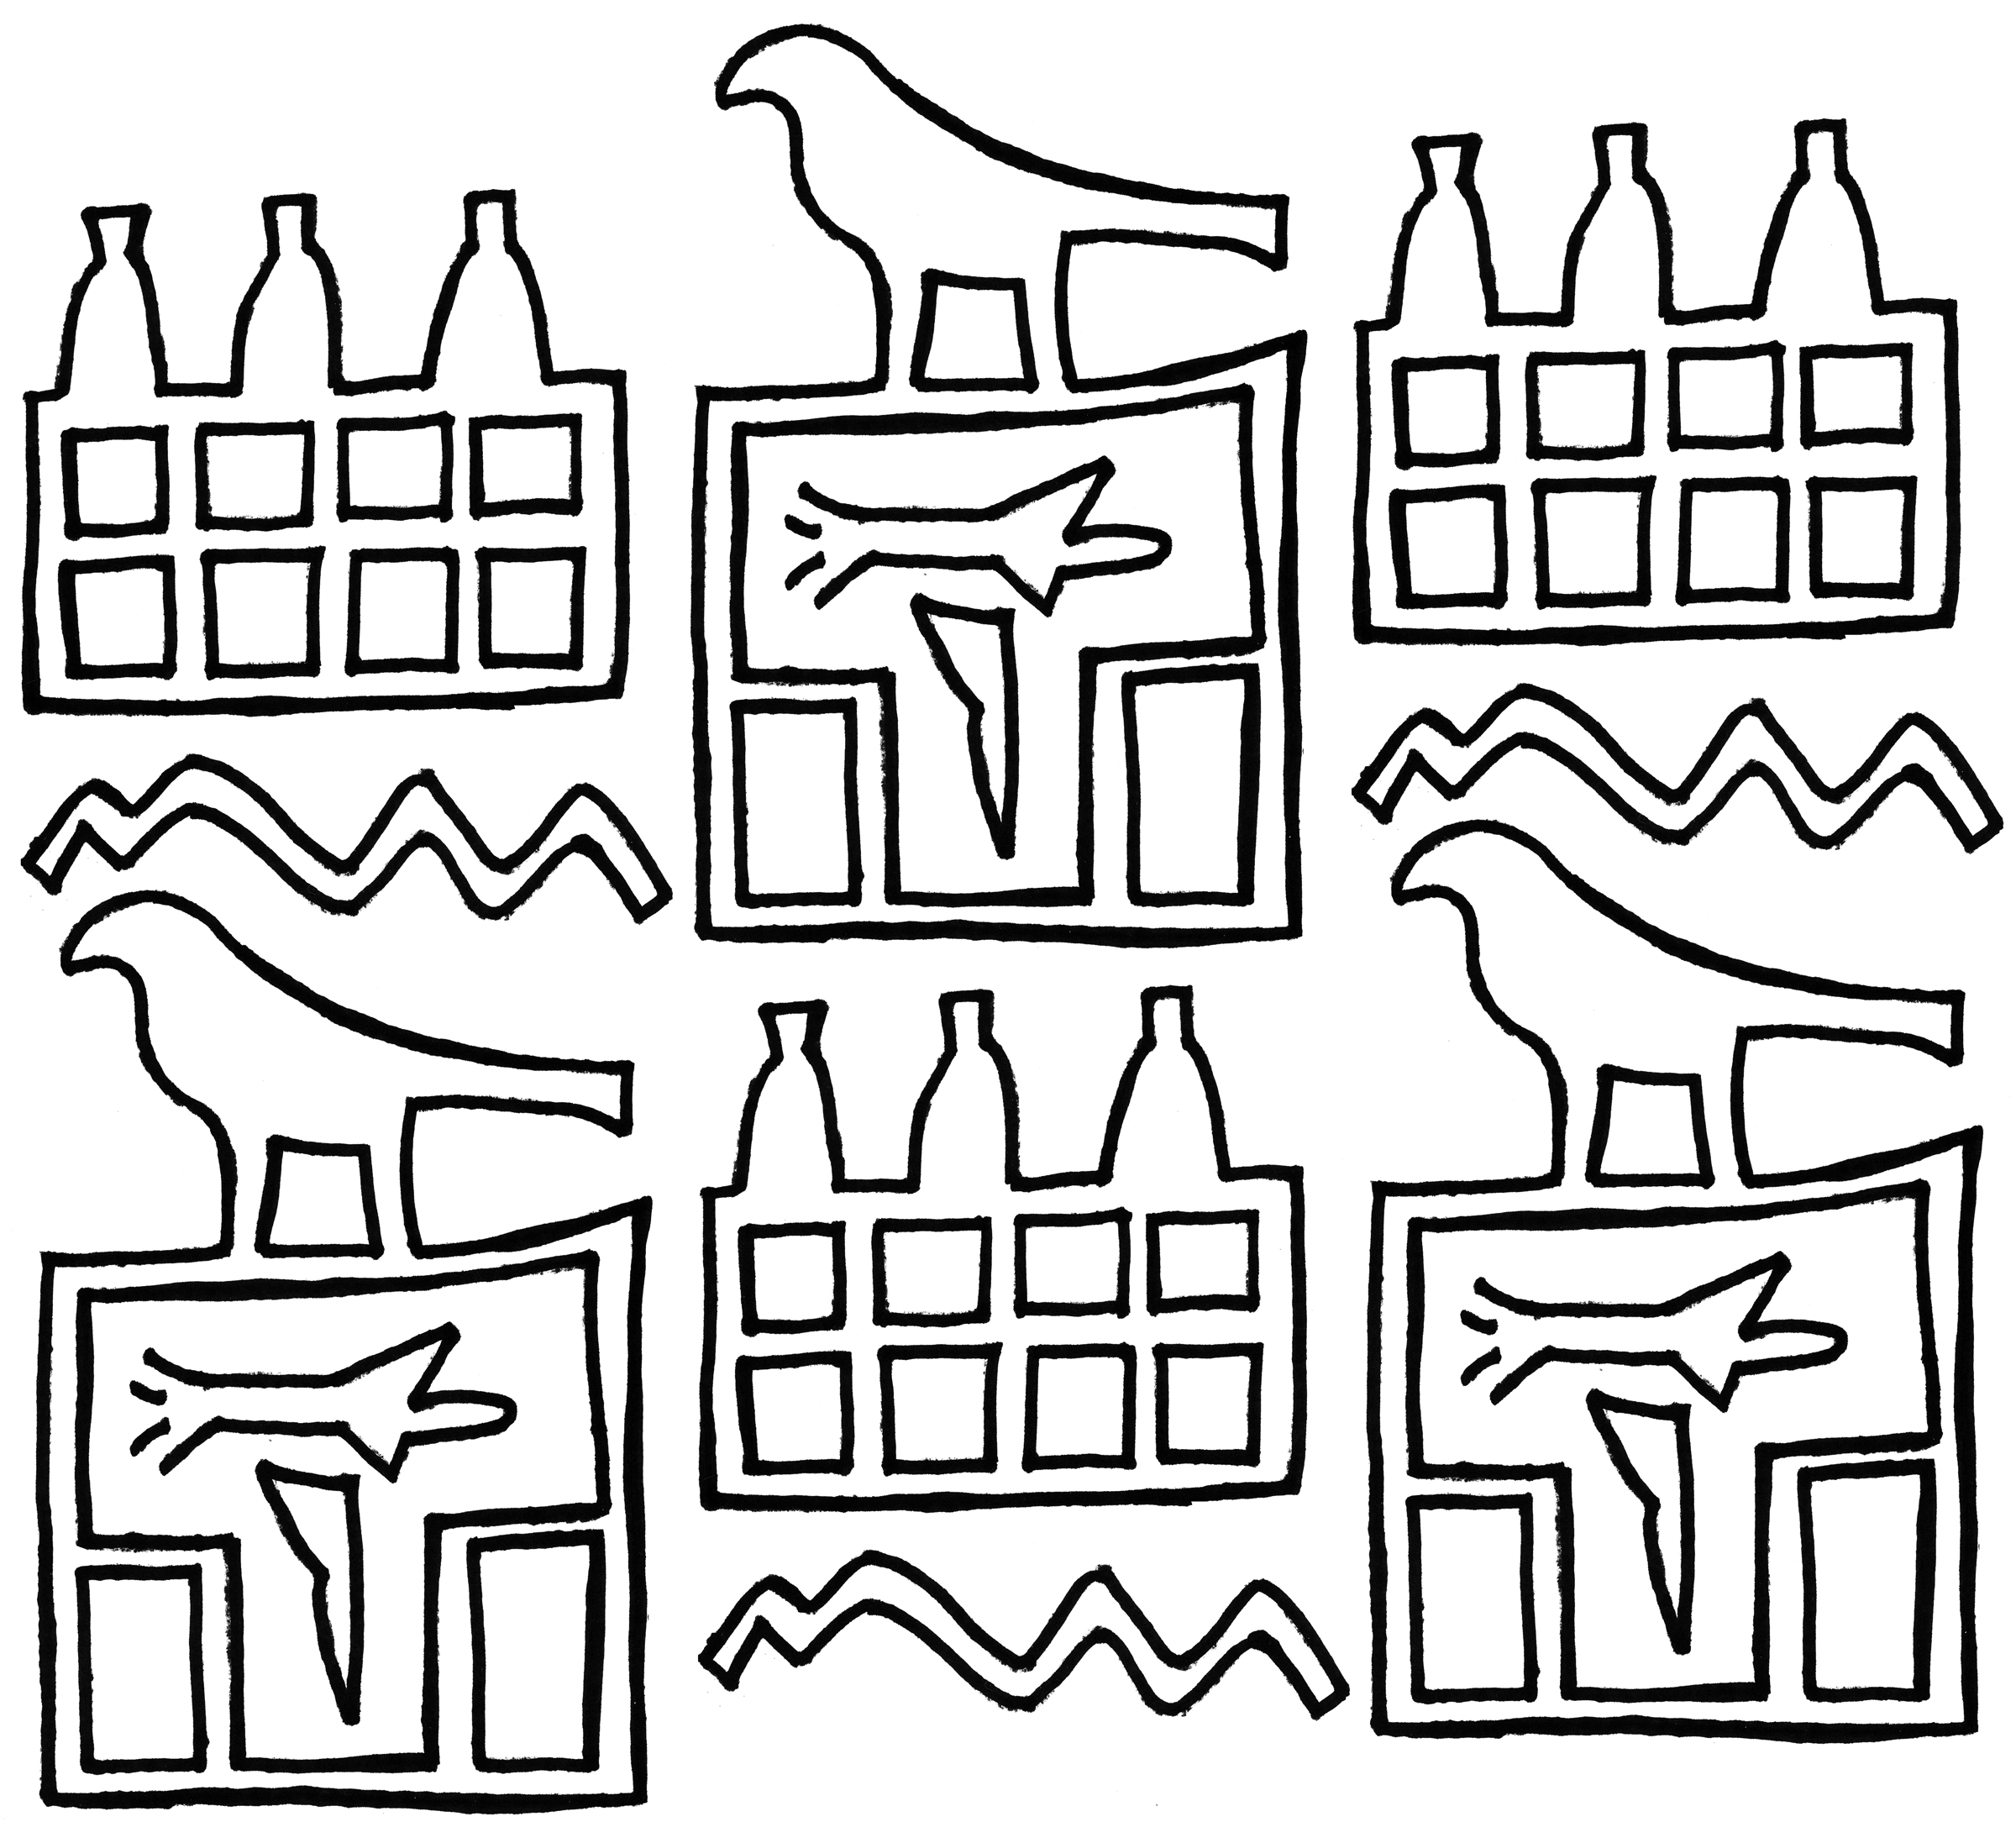 A reconstruction of the Narmer seal